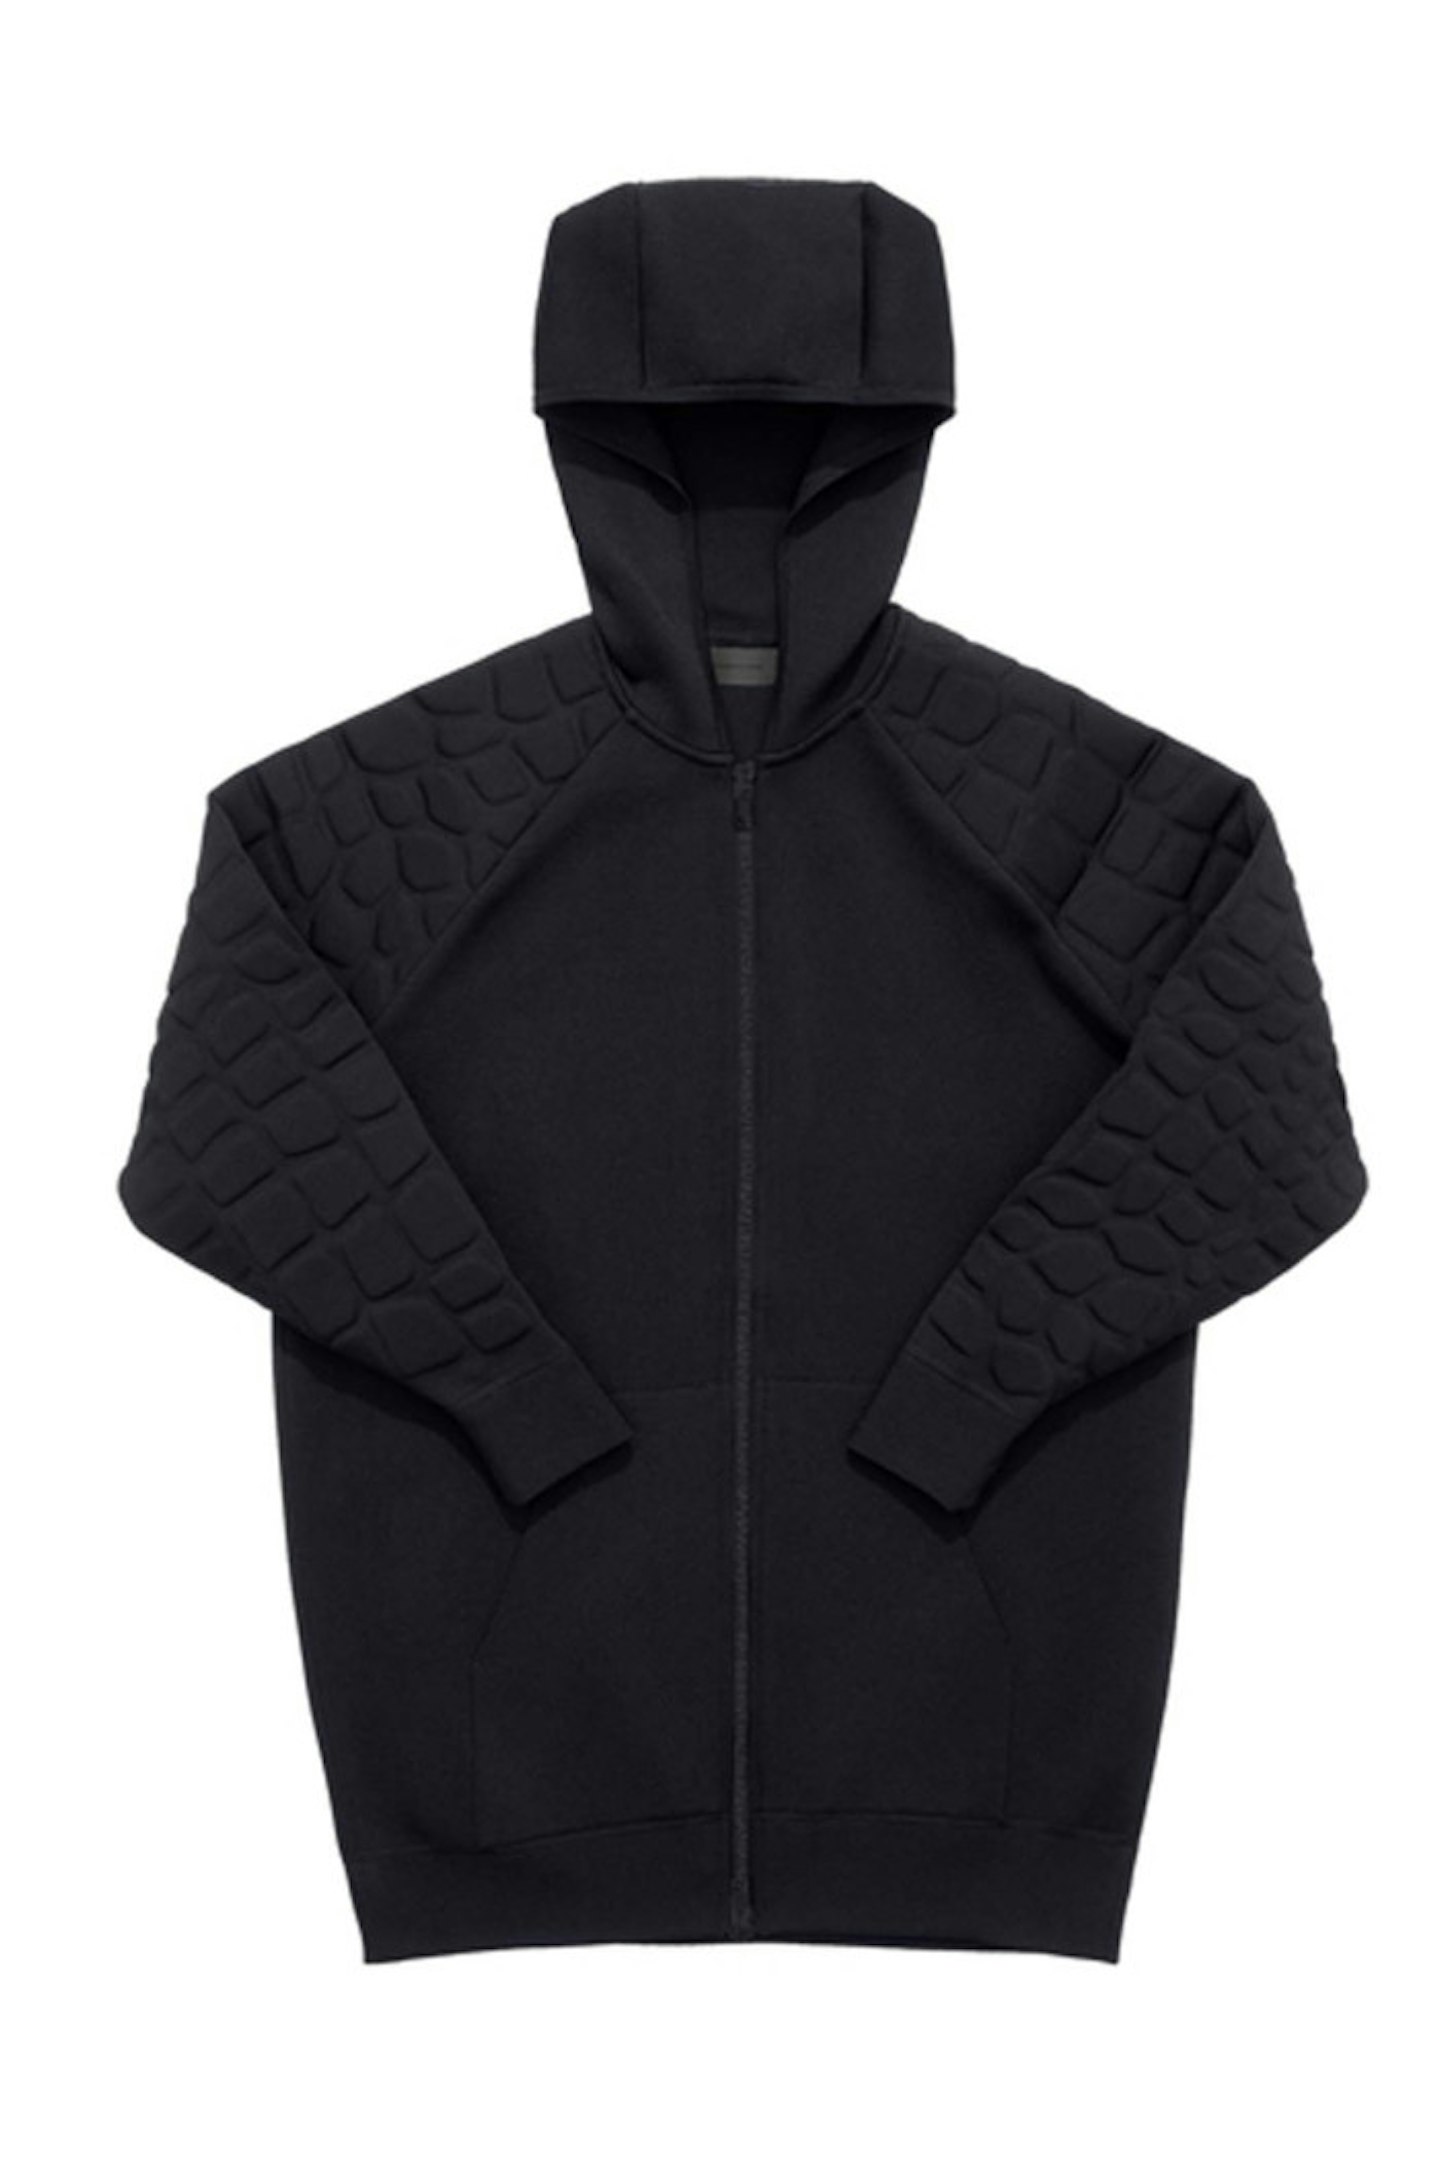 Hooded Jacket £179.99 by Alexander Wang x H&M